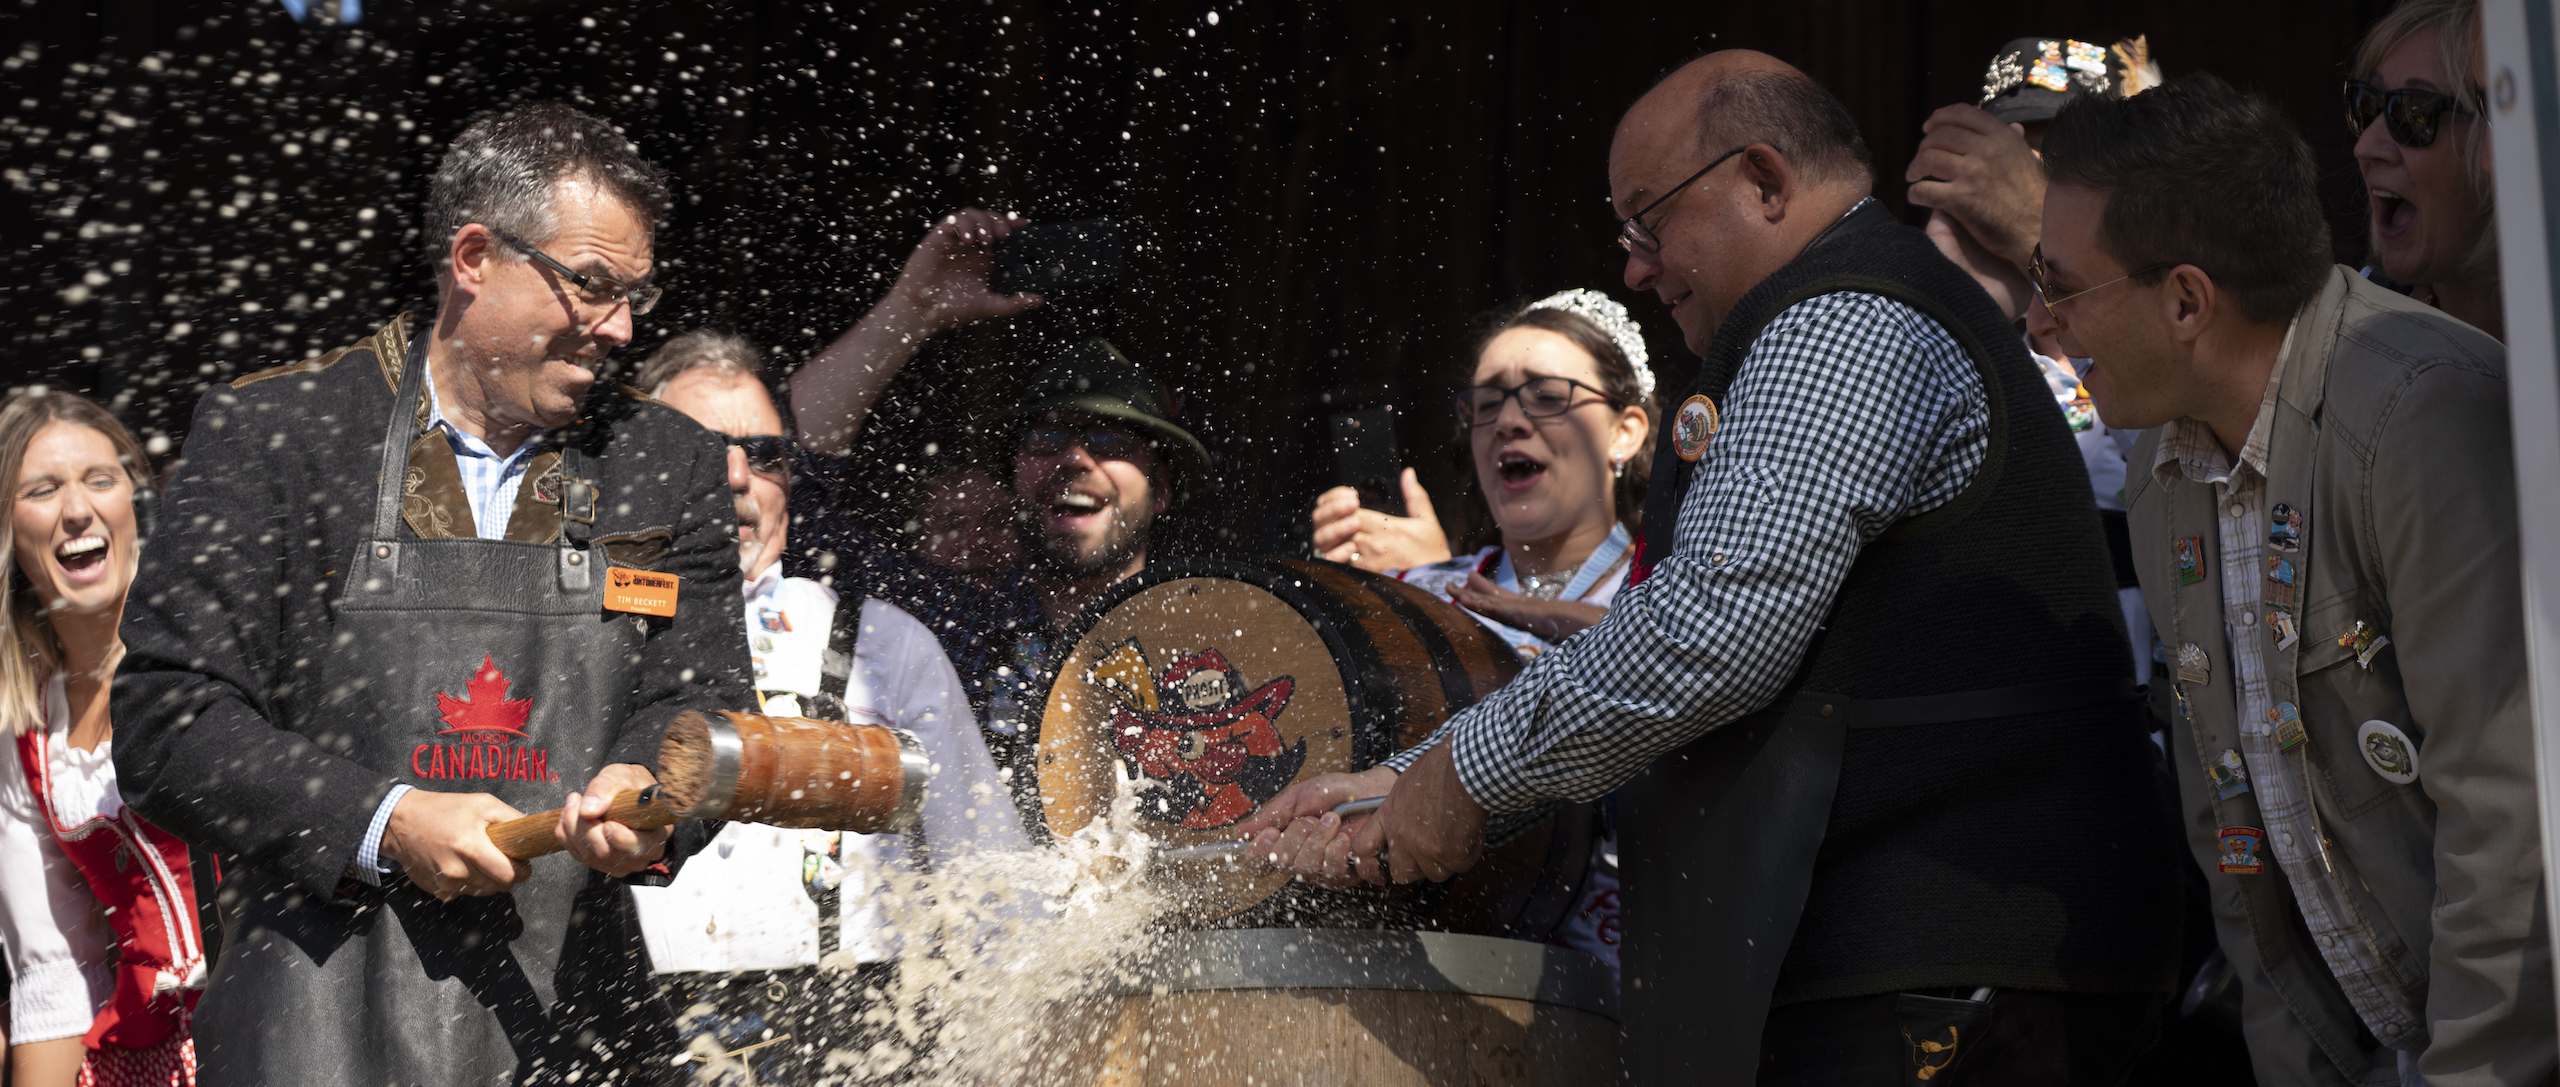 Tapping Of The Keg For Kitchener Waterloo Oktoberfest